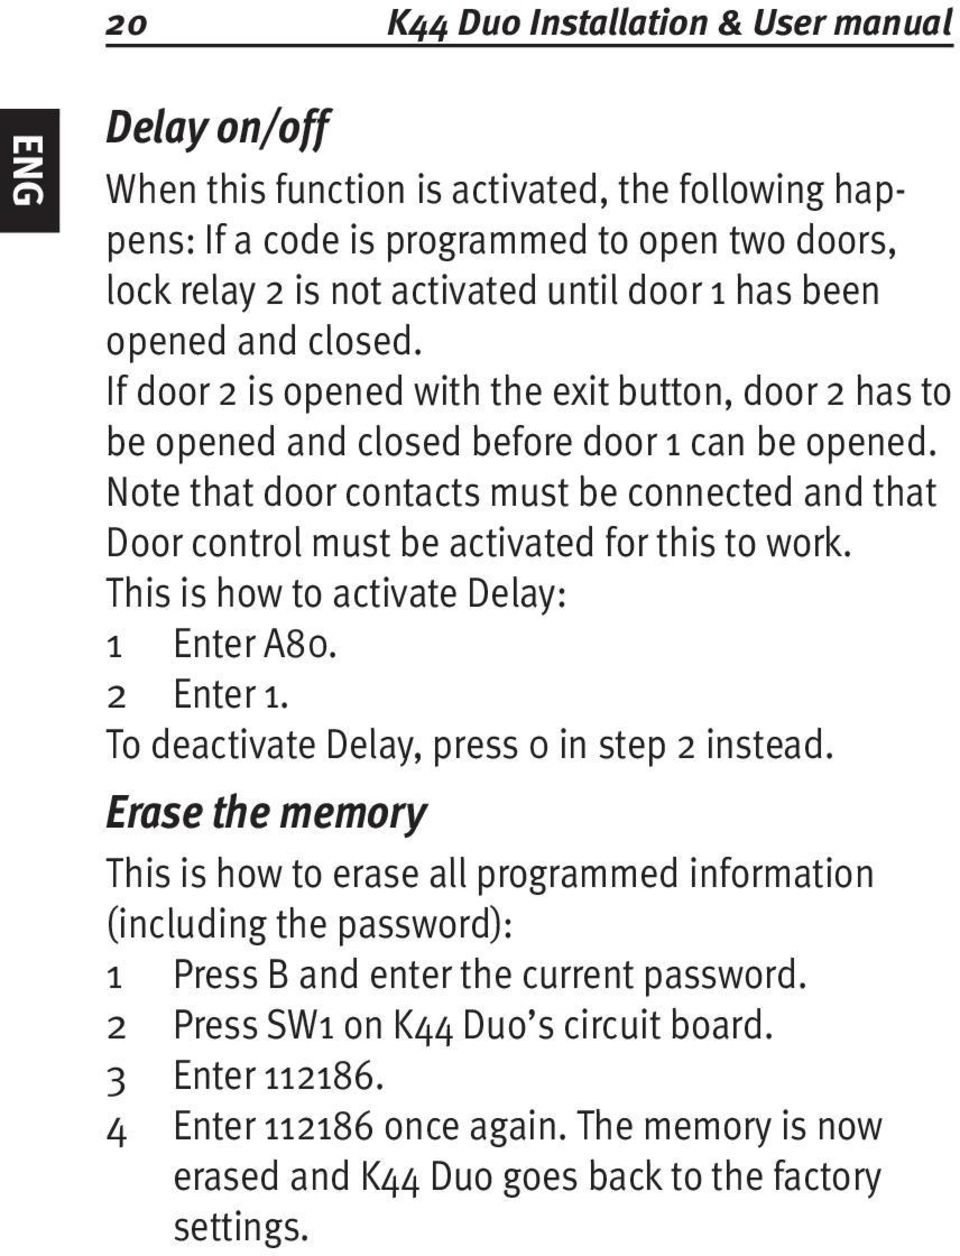 Note that door contacts must be connected and that Door control must be activated for this to work. This is how to activate Delay: 1 Enter A80. 2 Enter 1.